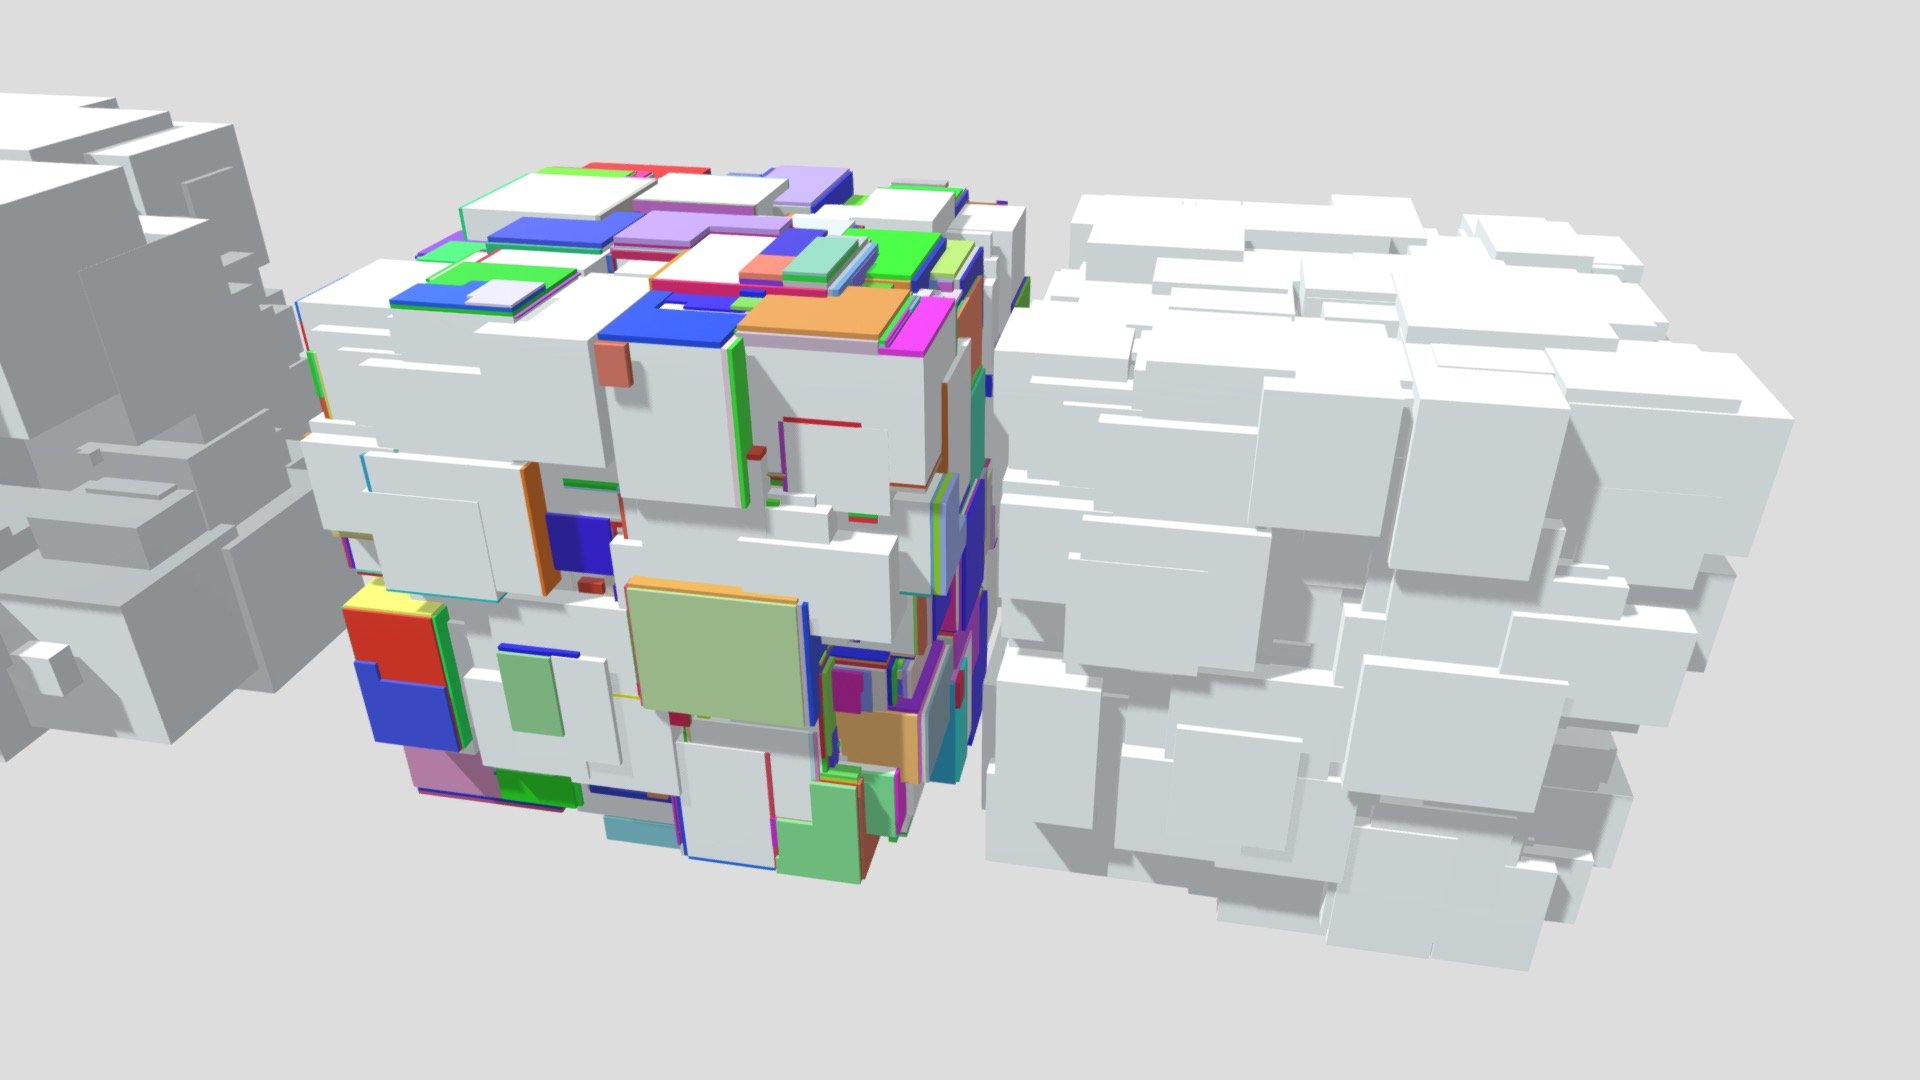 In this episode of LIVENODING, I talk about Scattering of Cubes on the Default Cube:
https://youtu.be/JjlUDTYrCBU

This BLEND contains:
- Geometry Nodes setup that generates random
- Baked result from RandomFlow addon - GM x RandomFlow Scatter Cubes - Buy Royalty Free 3D model by Jimmy Gunawan (@jimmygunawan) 3d model